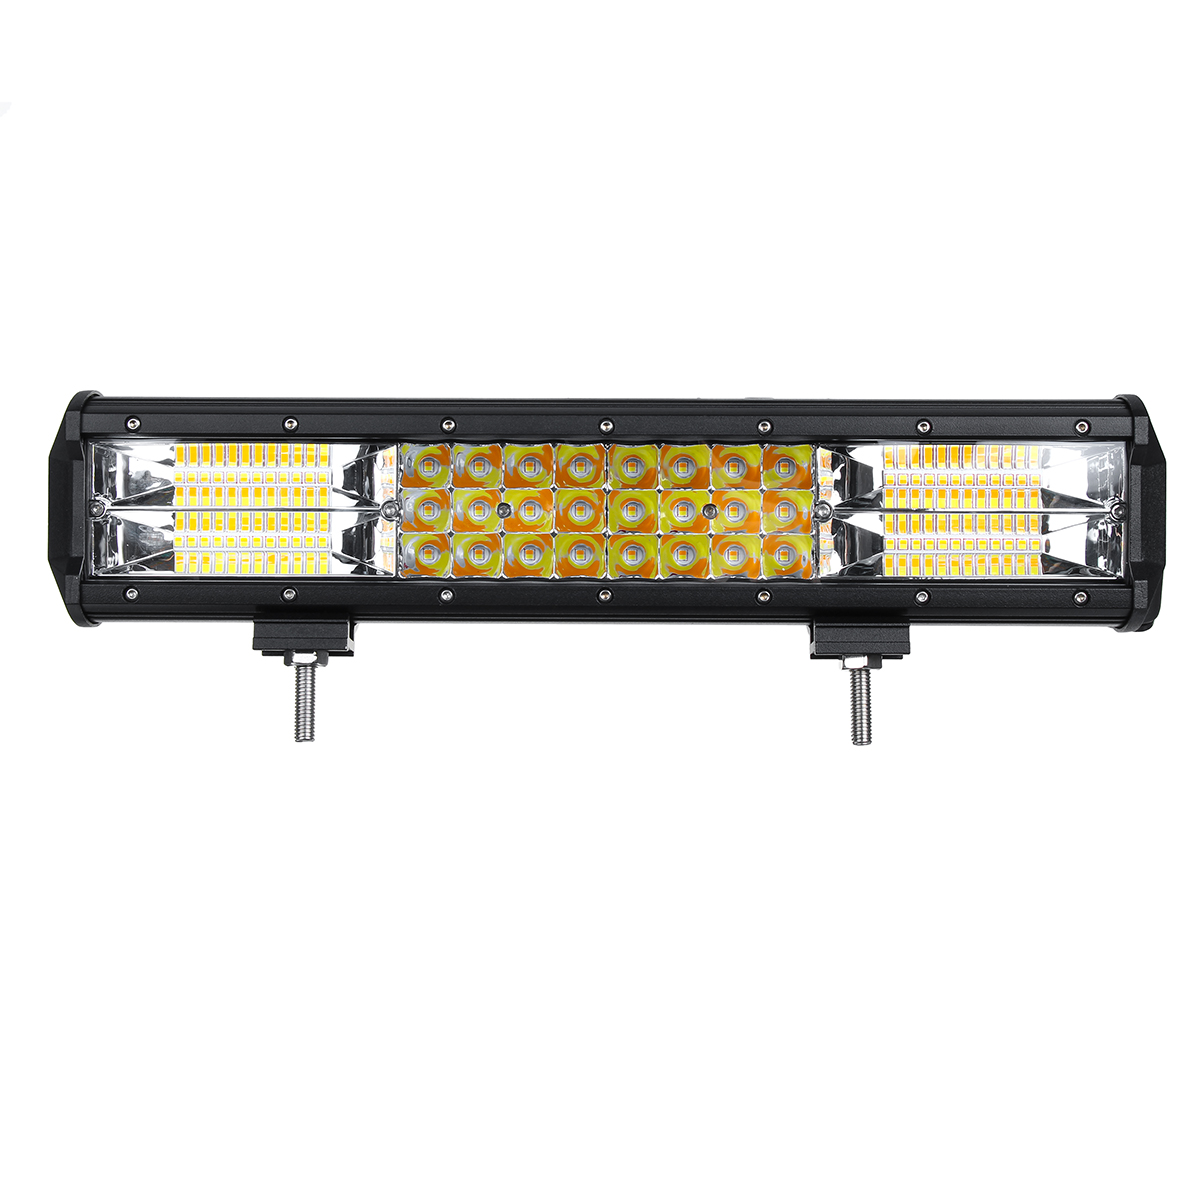 

14.5Inch 216W LED Work Light Bar Strobe Flash Lamp Waterproof Dual Color White+Amber 10-30V for Offroad SUV Truck Traile